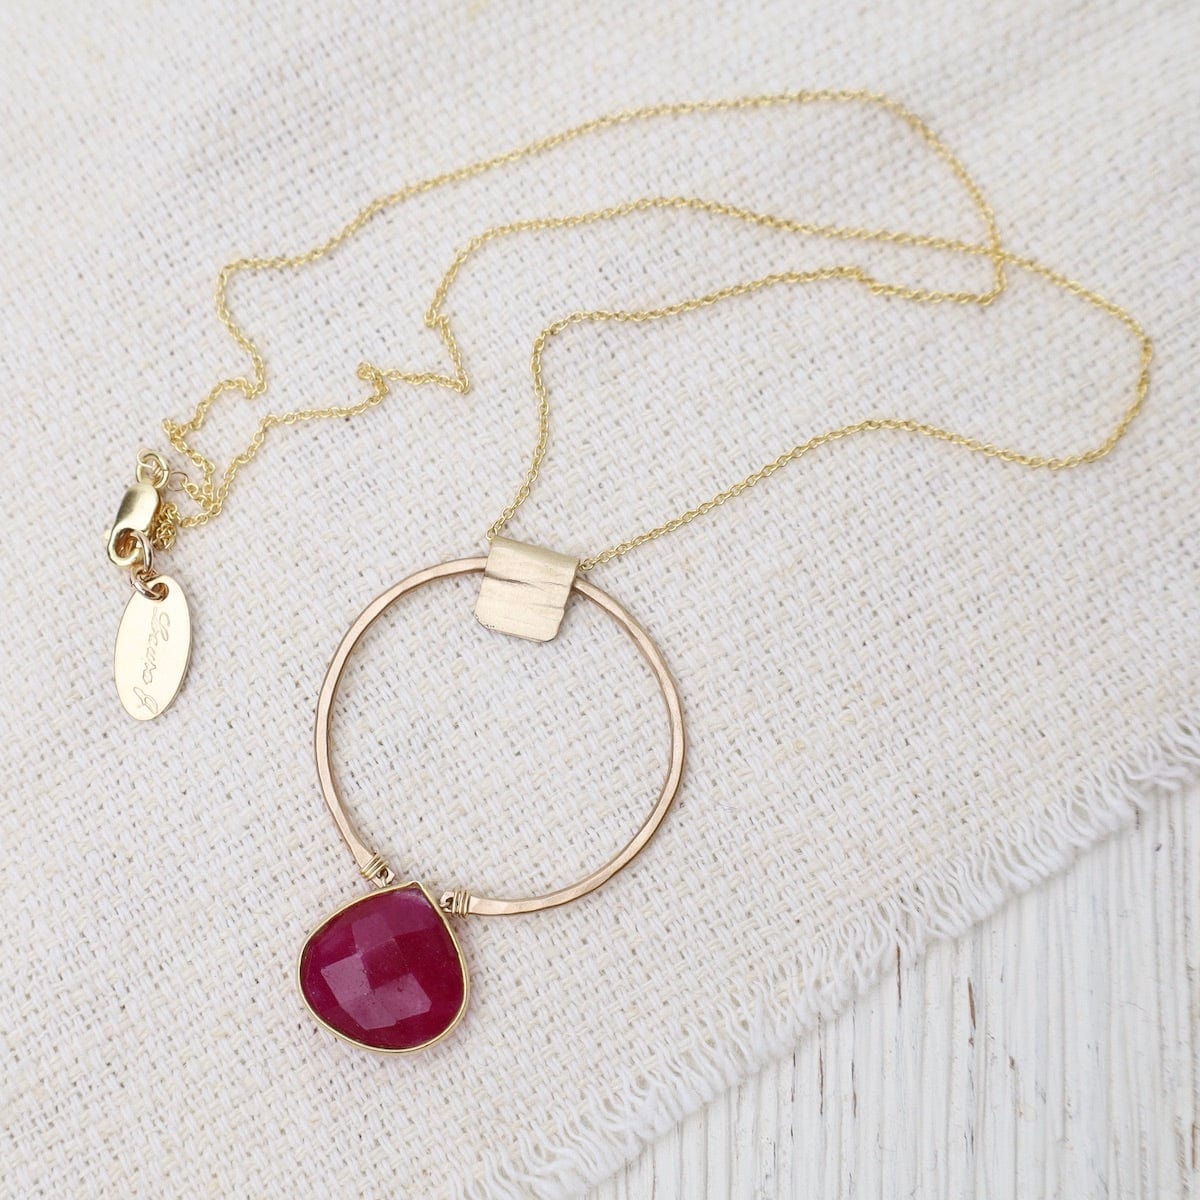 NKL-GF Circle Pendant with Ruby Necklace